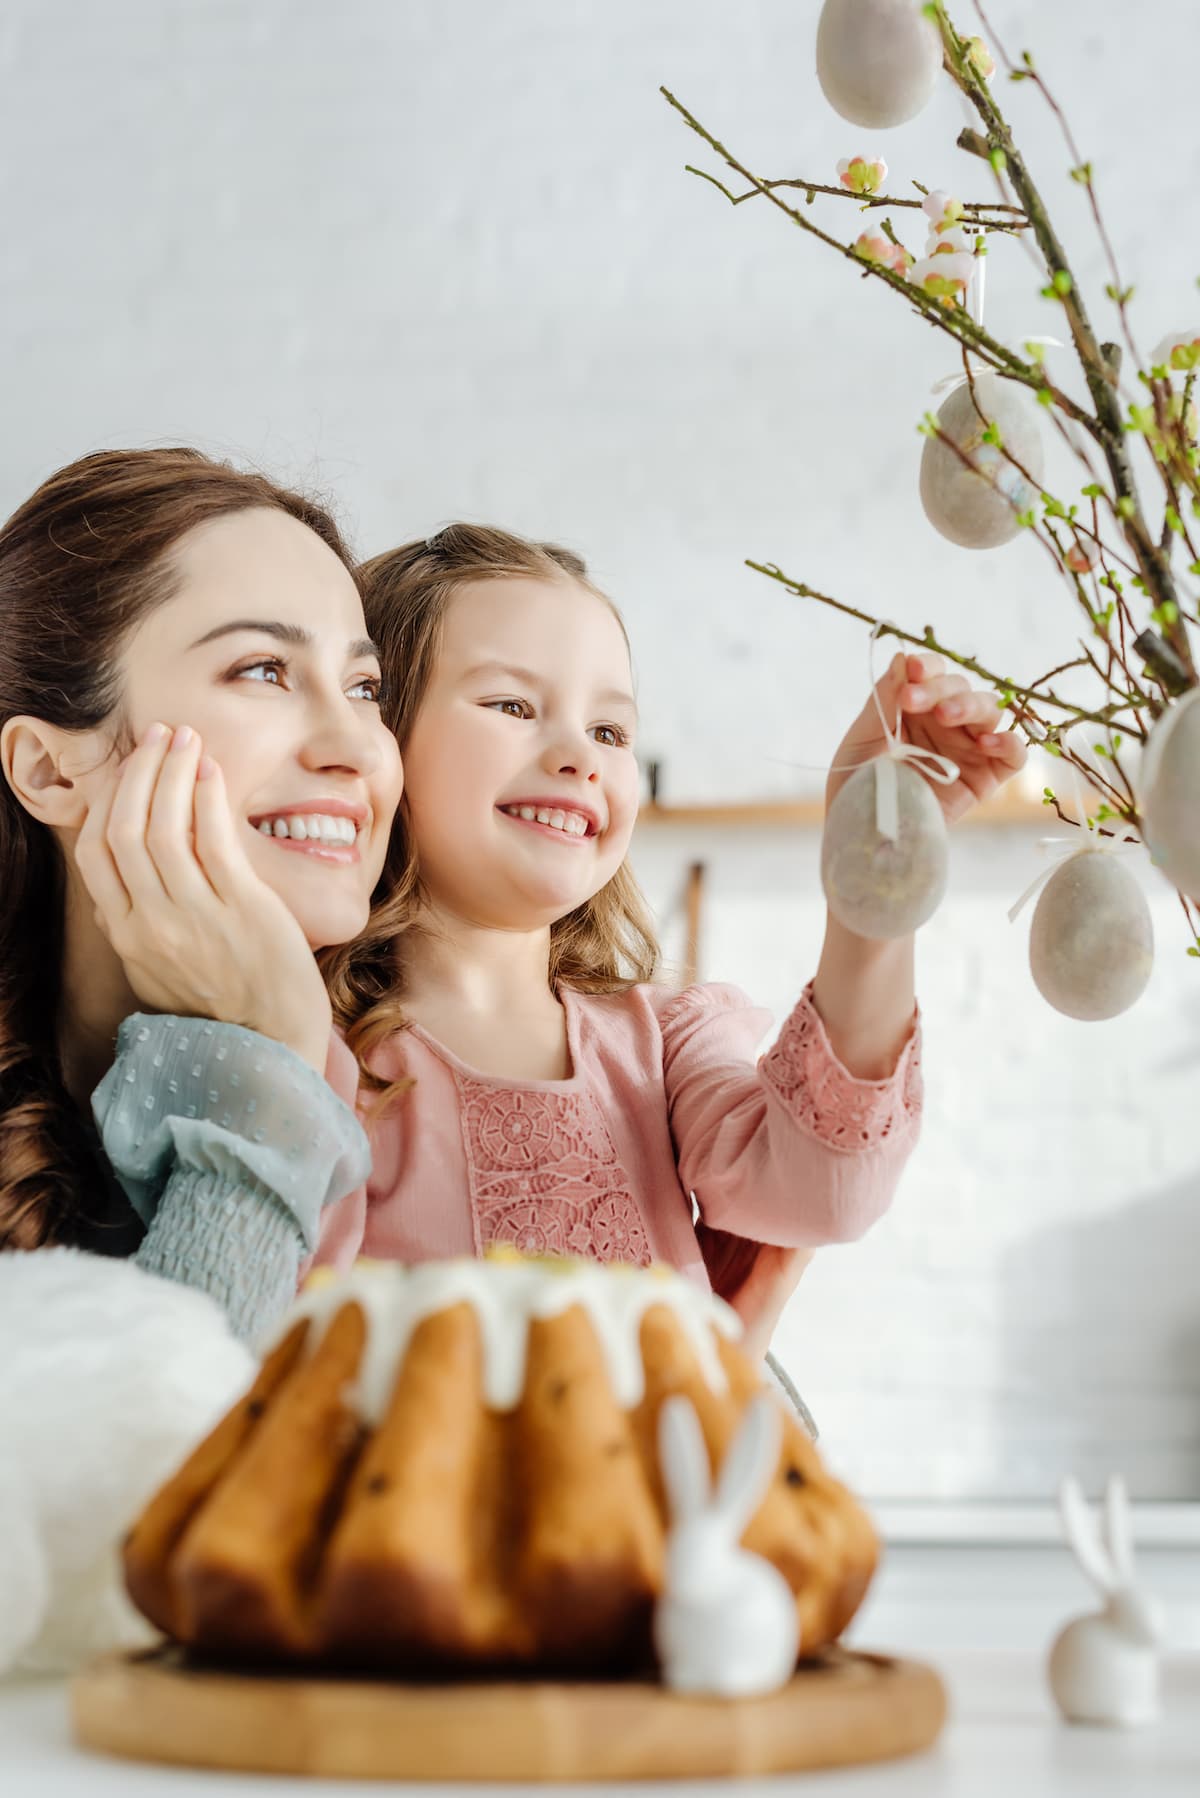 A happy mom and daughter hanging Easter eggs as part of a family ritual